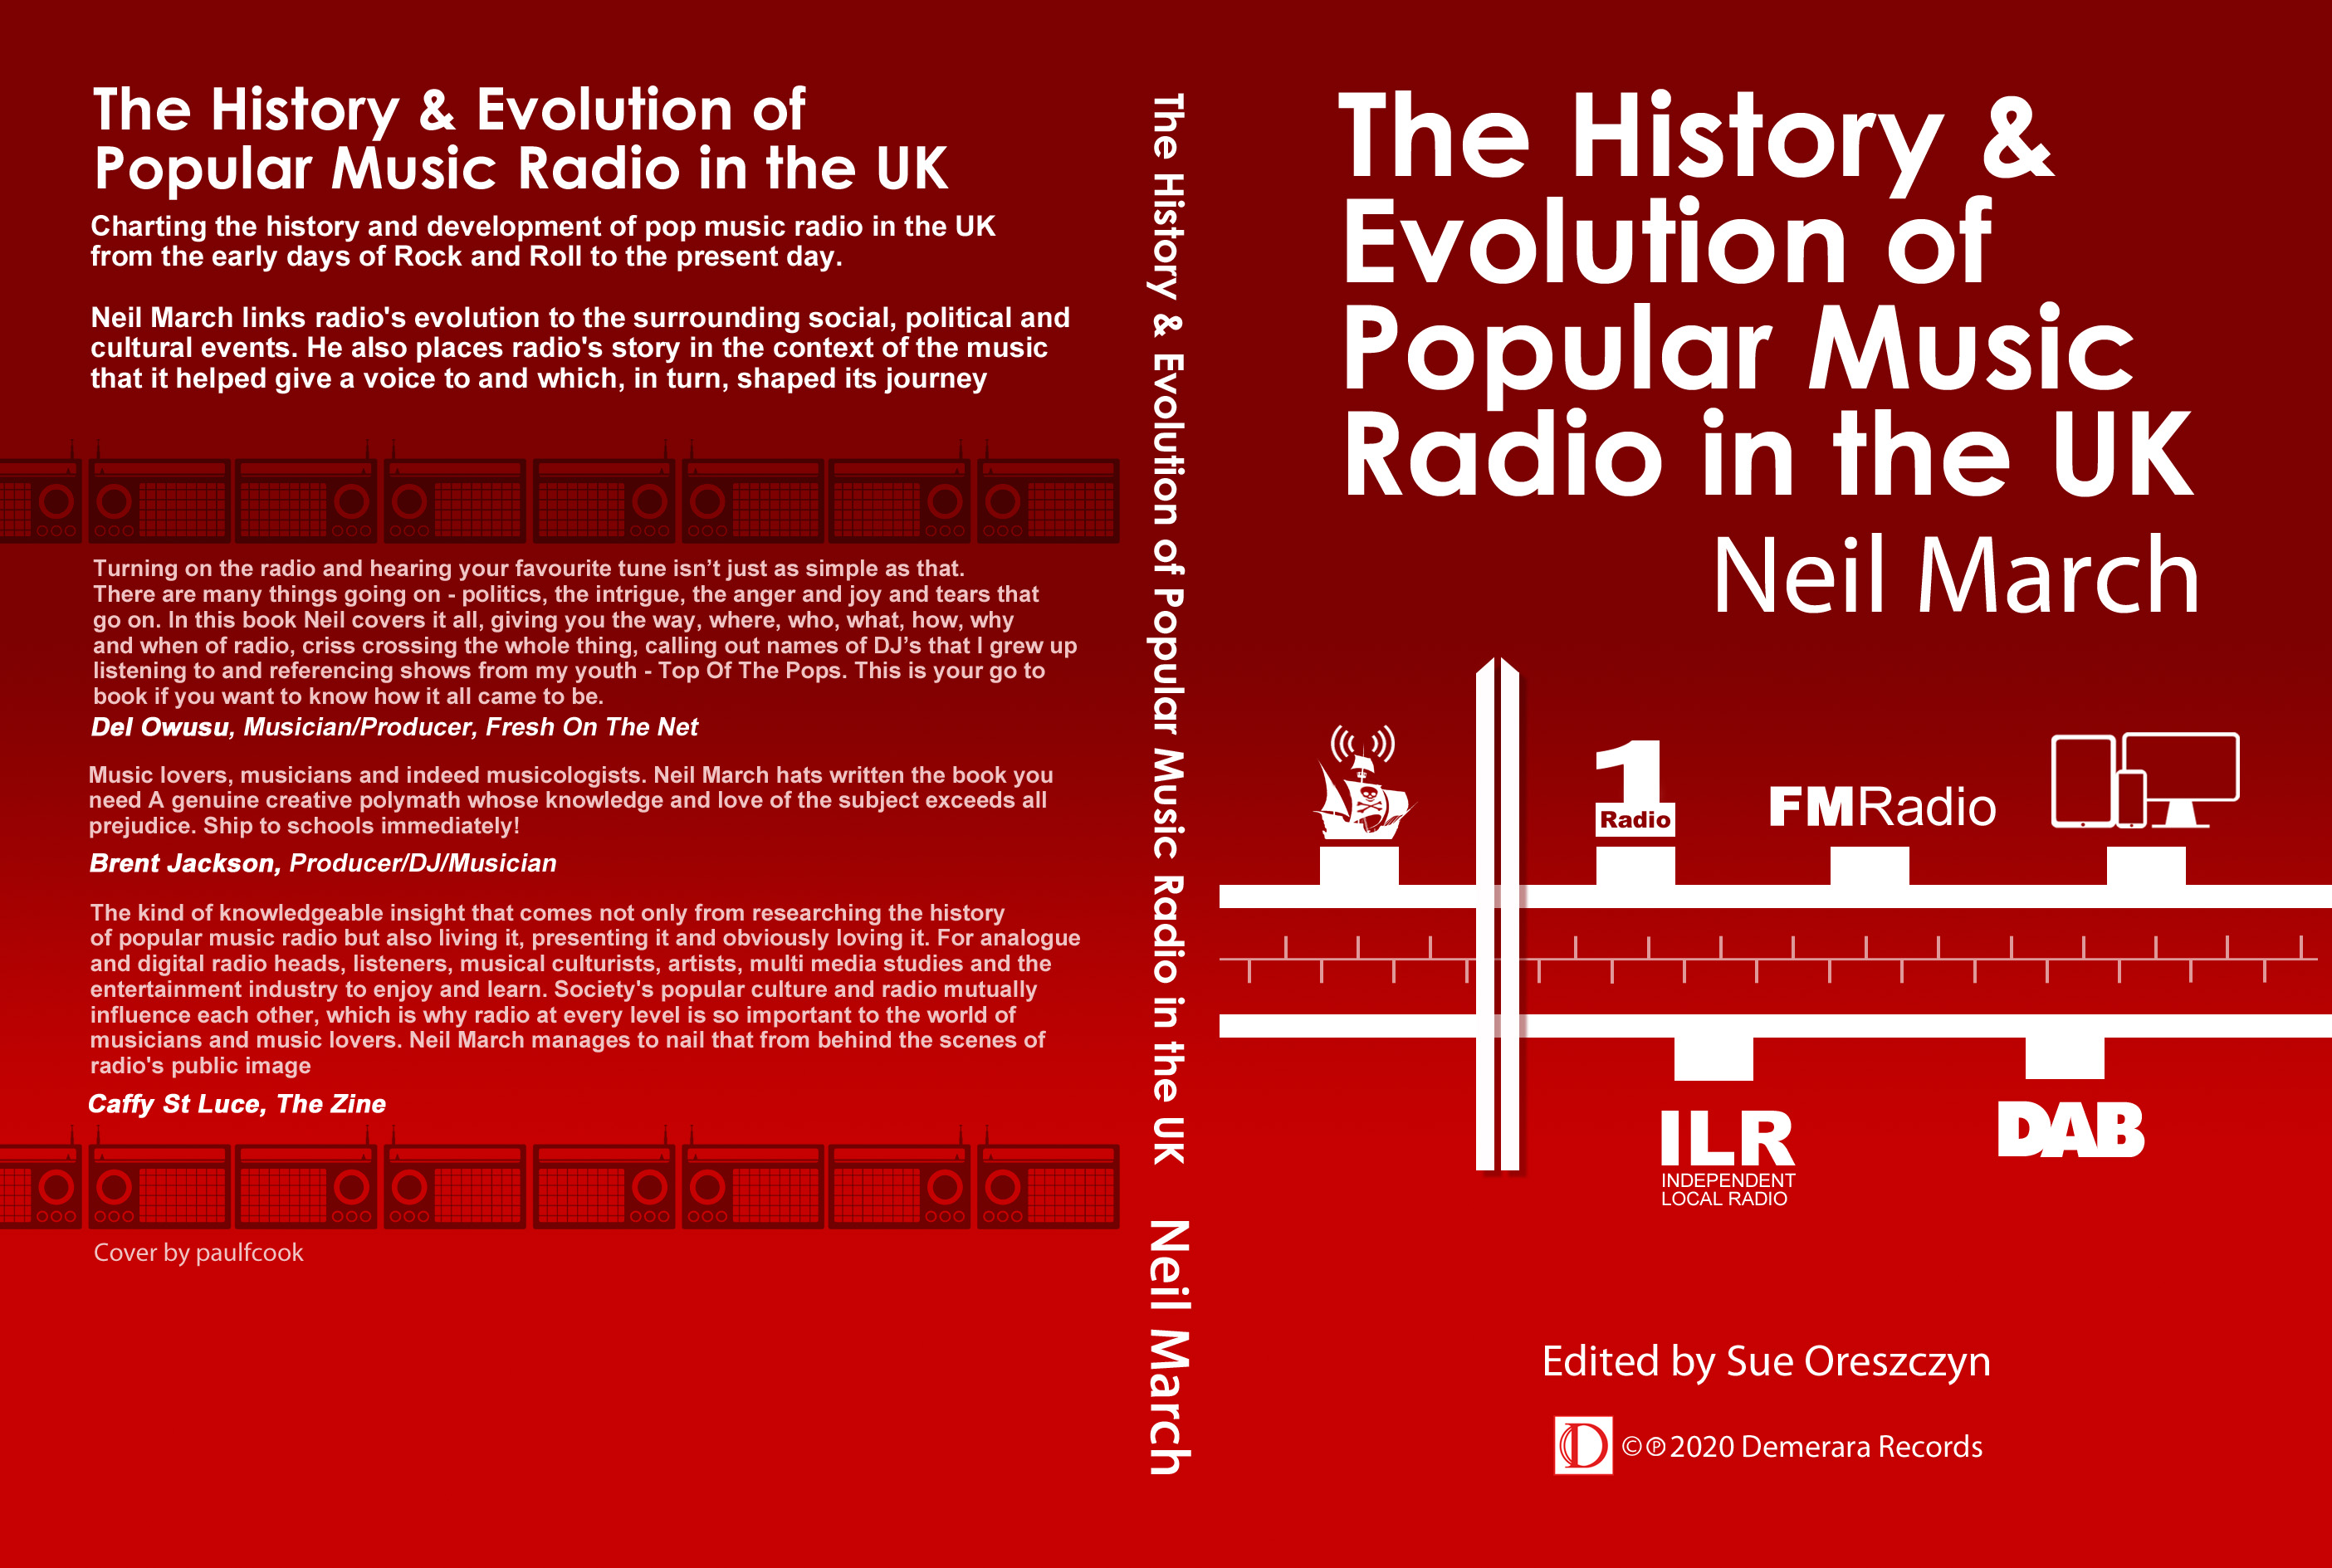 The History and Evolution of Popular UK Music Radio by Neil March